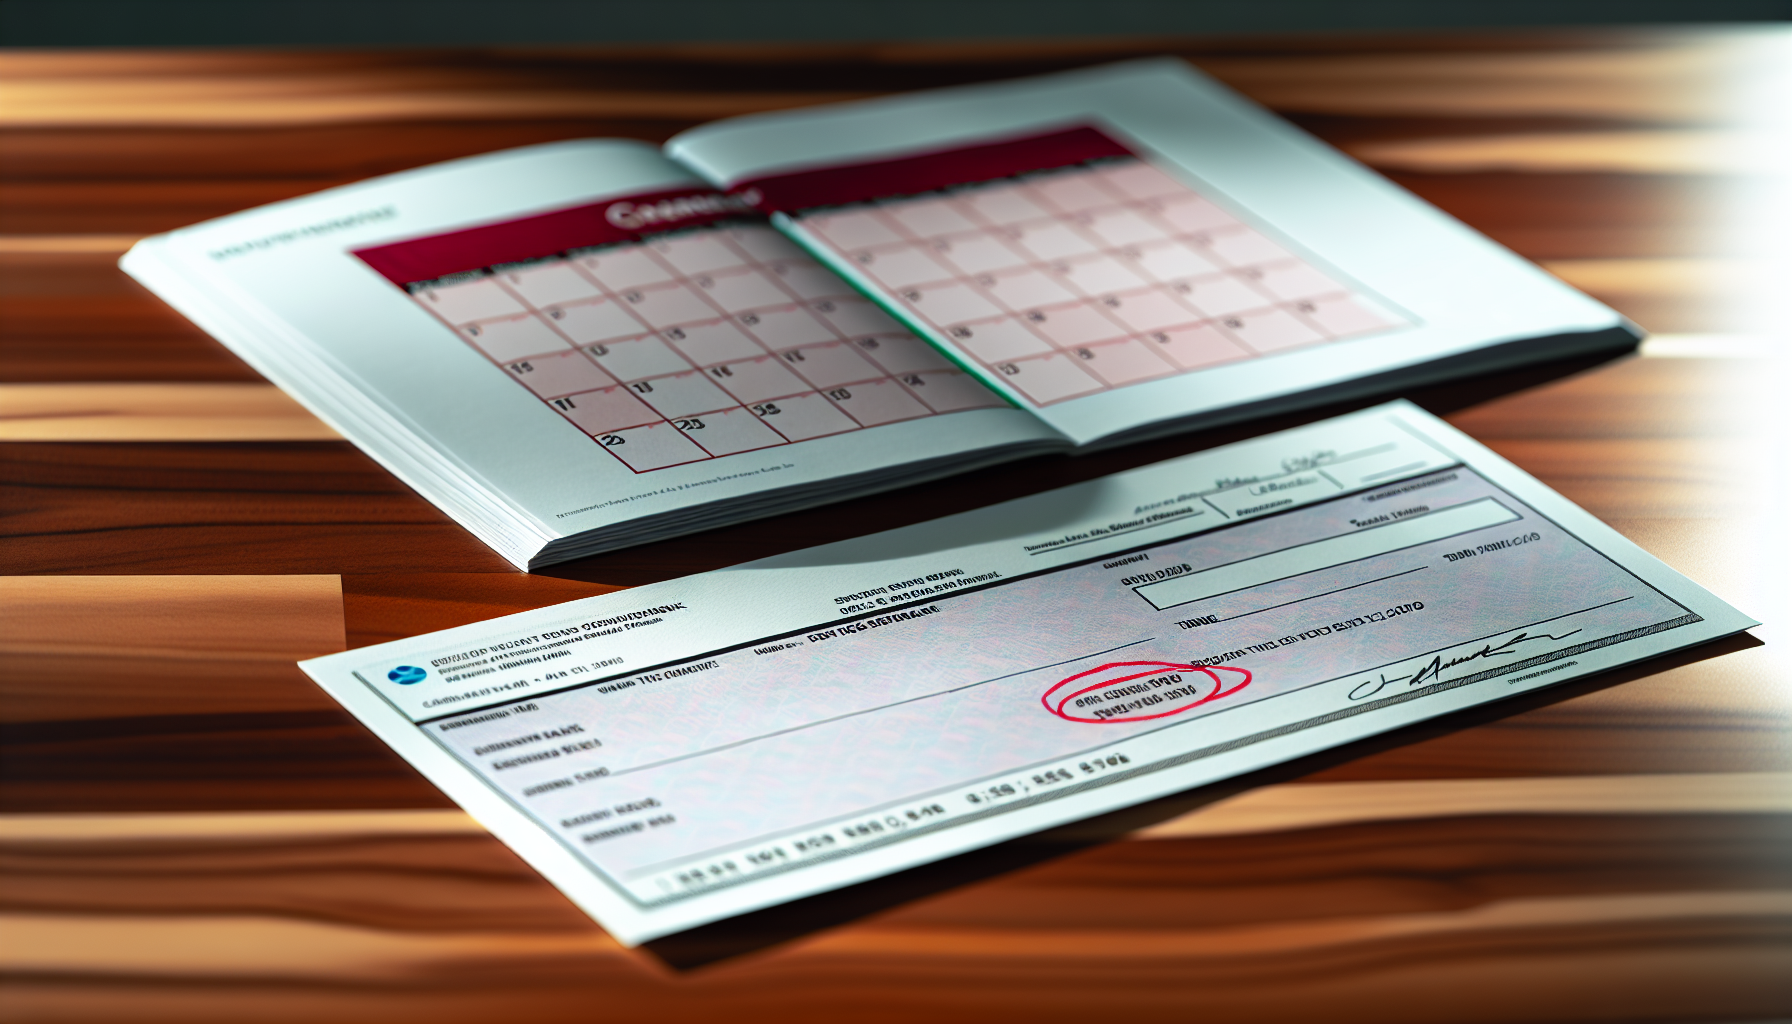 An image of a paycheck and a calendar, representing the compensation, benefits, and time off policies detailed in the employee handbook.